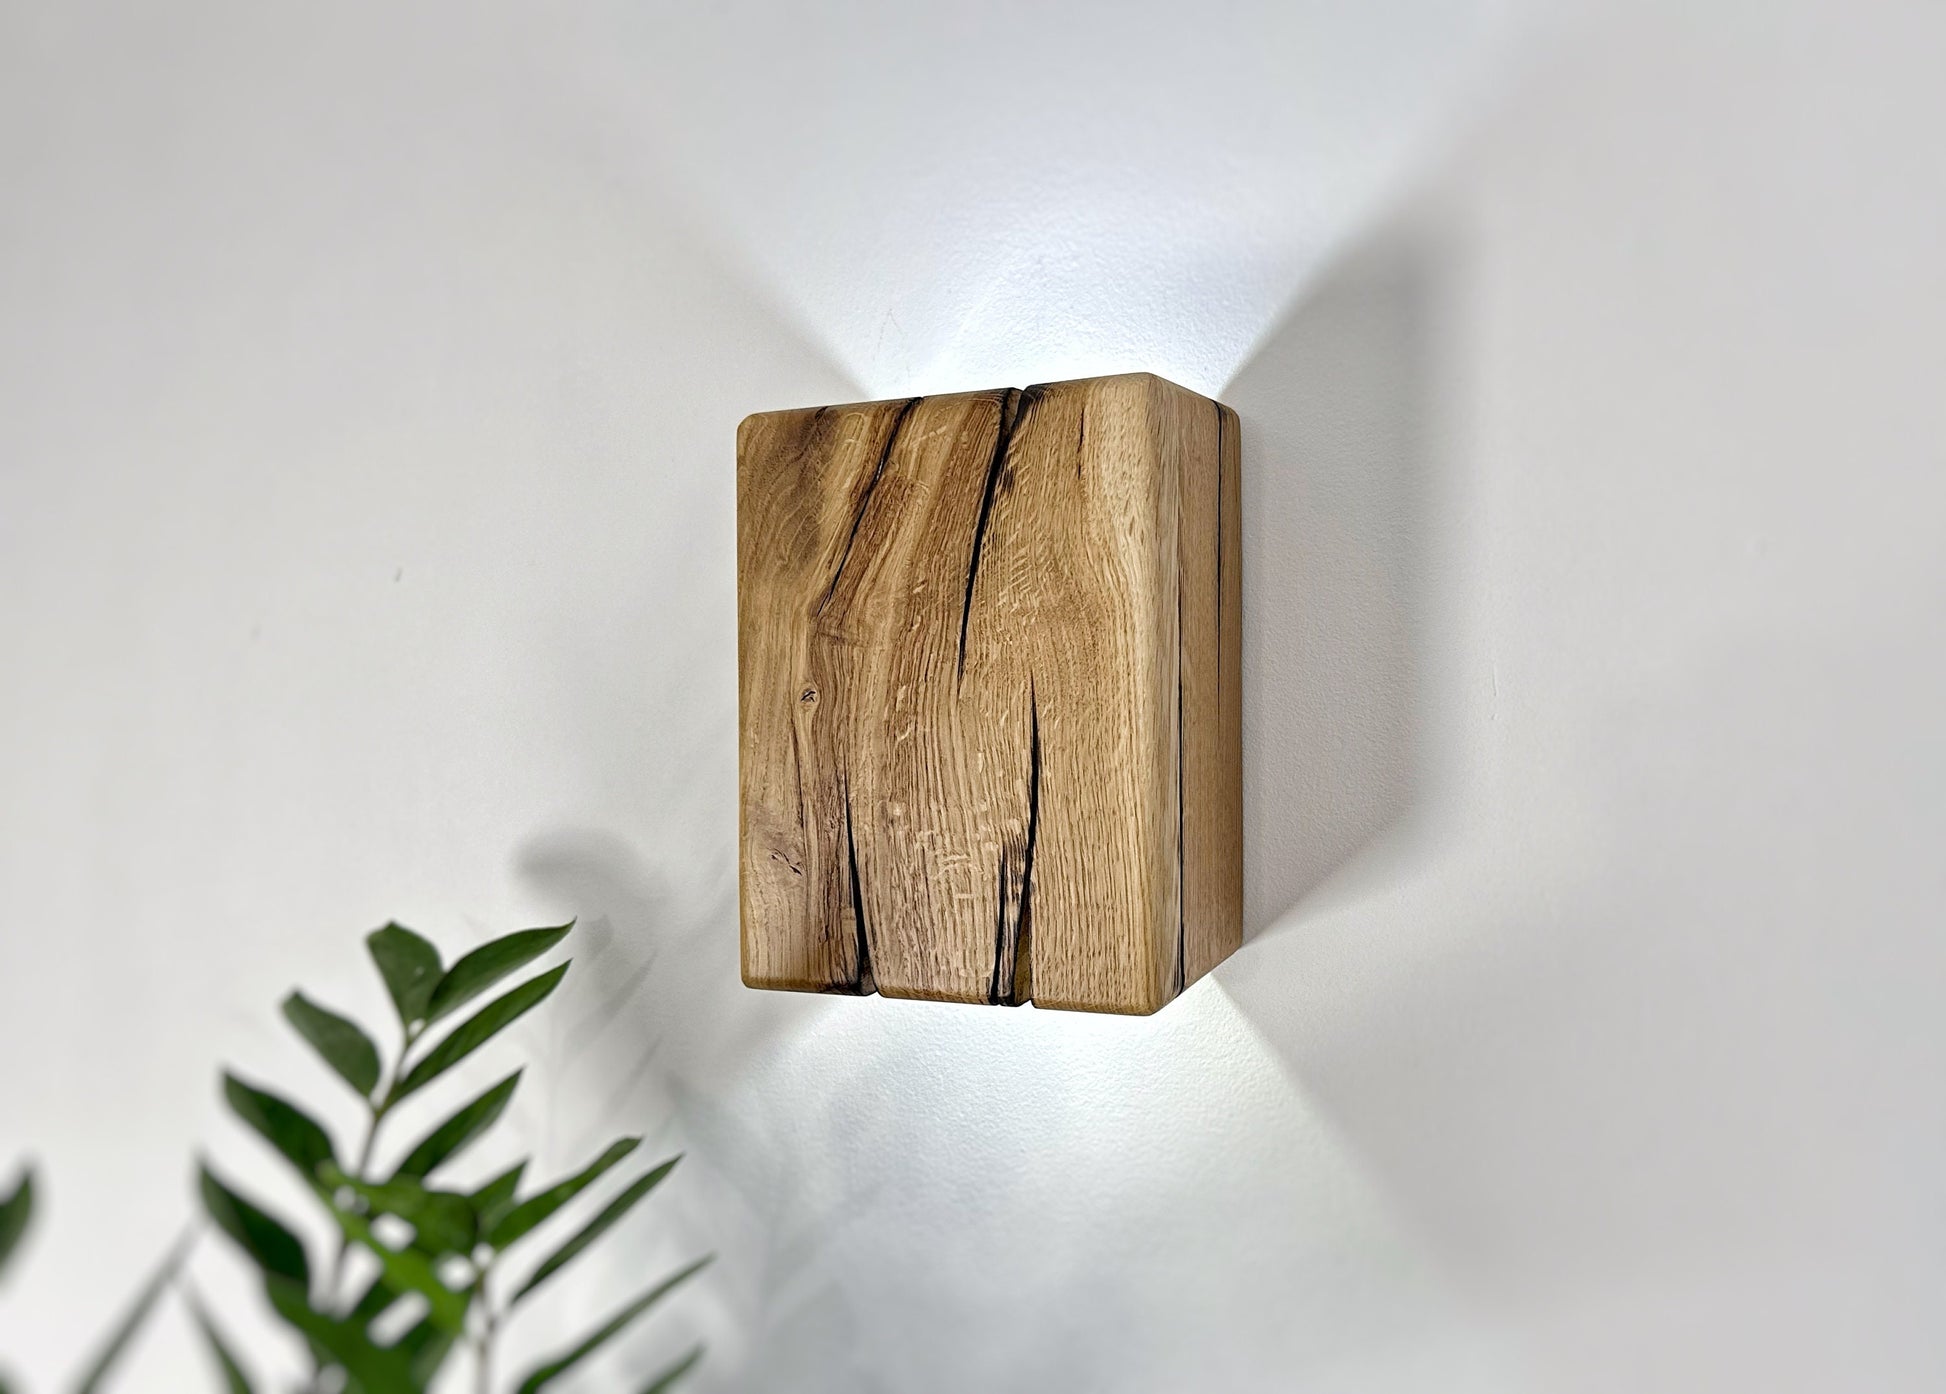 Wandlampe, wood plug in wall sconce, with switch fixture, wall bedside lamp, sconce lighting, lampshade, wood oak wall lamp, applique murale